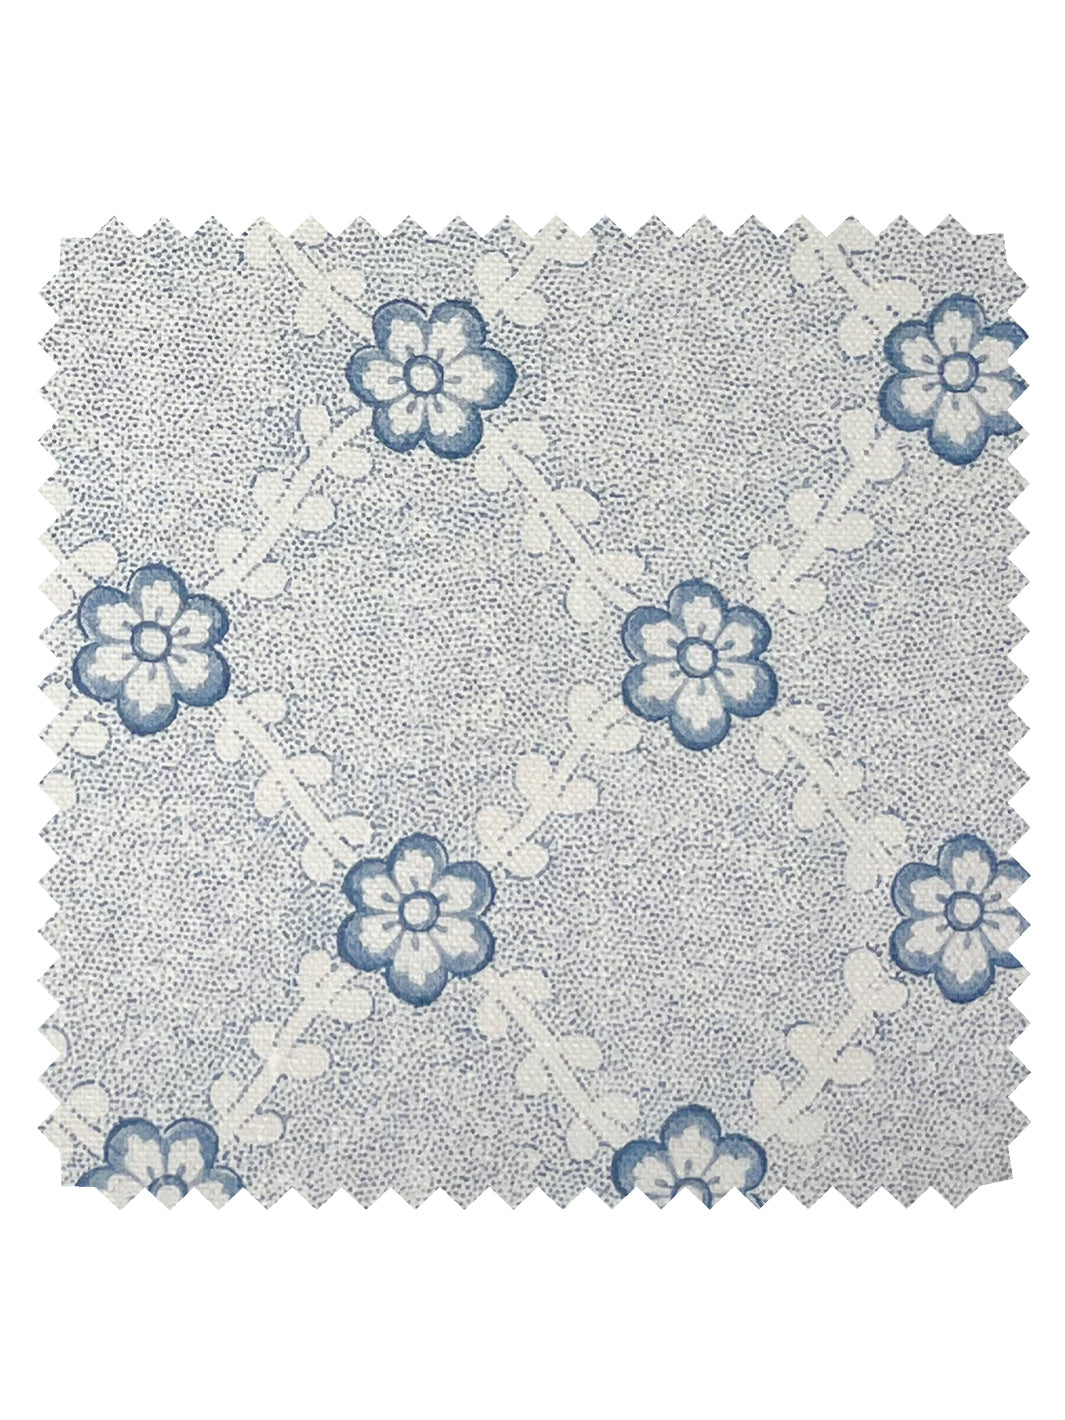 'Lucia' Linen Fabric by Nathan Turner - Blue